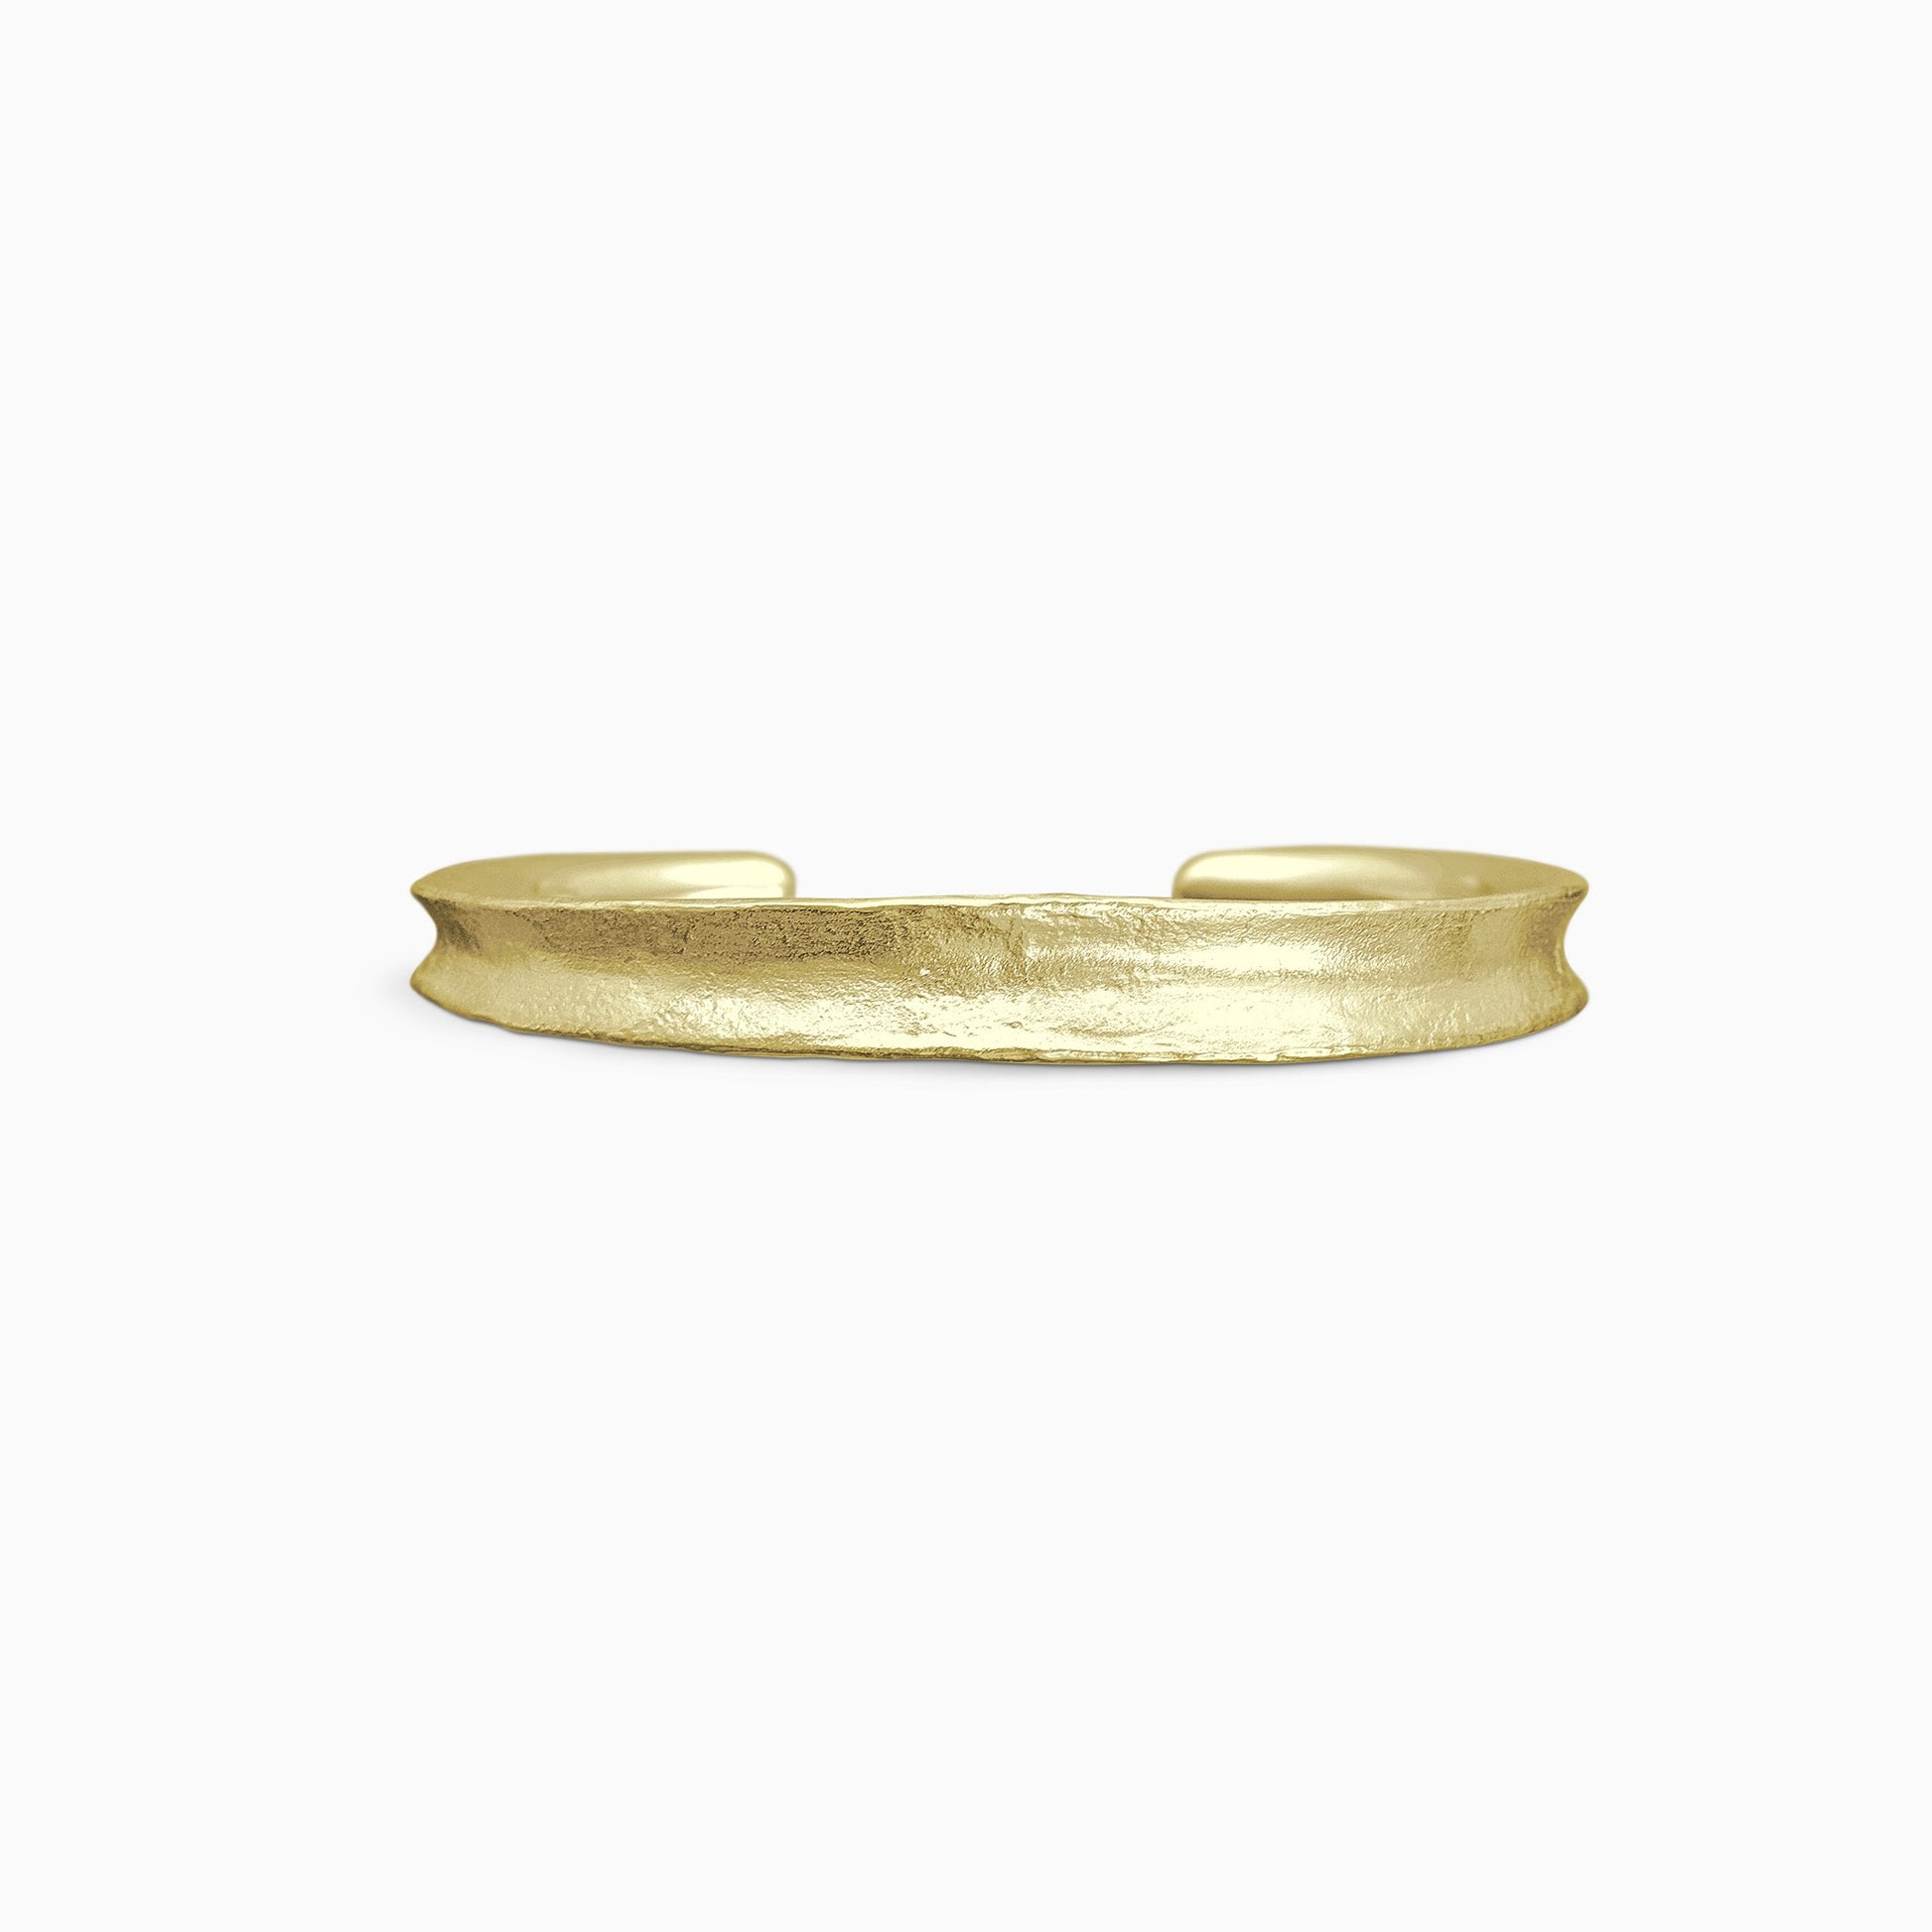 An 18ct Fairtrade yellow gold Cuff bangle fitting close to wrist. Concave and textured. Open ended to get on and off. Width 8mm. Inside oval diameter 65mm.